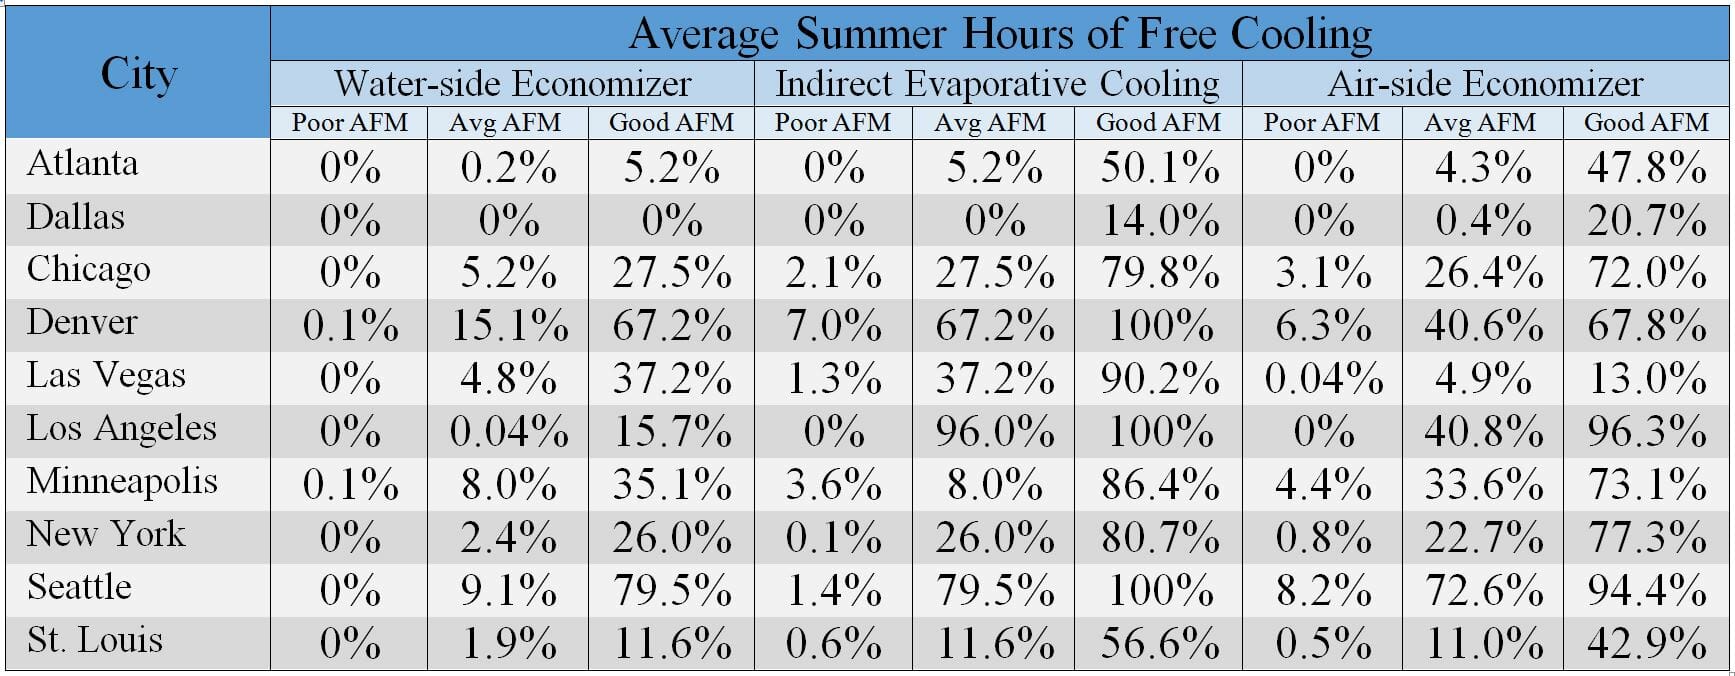 Average Summer Hours of Free Cooling